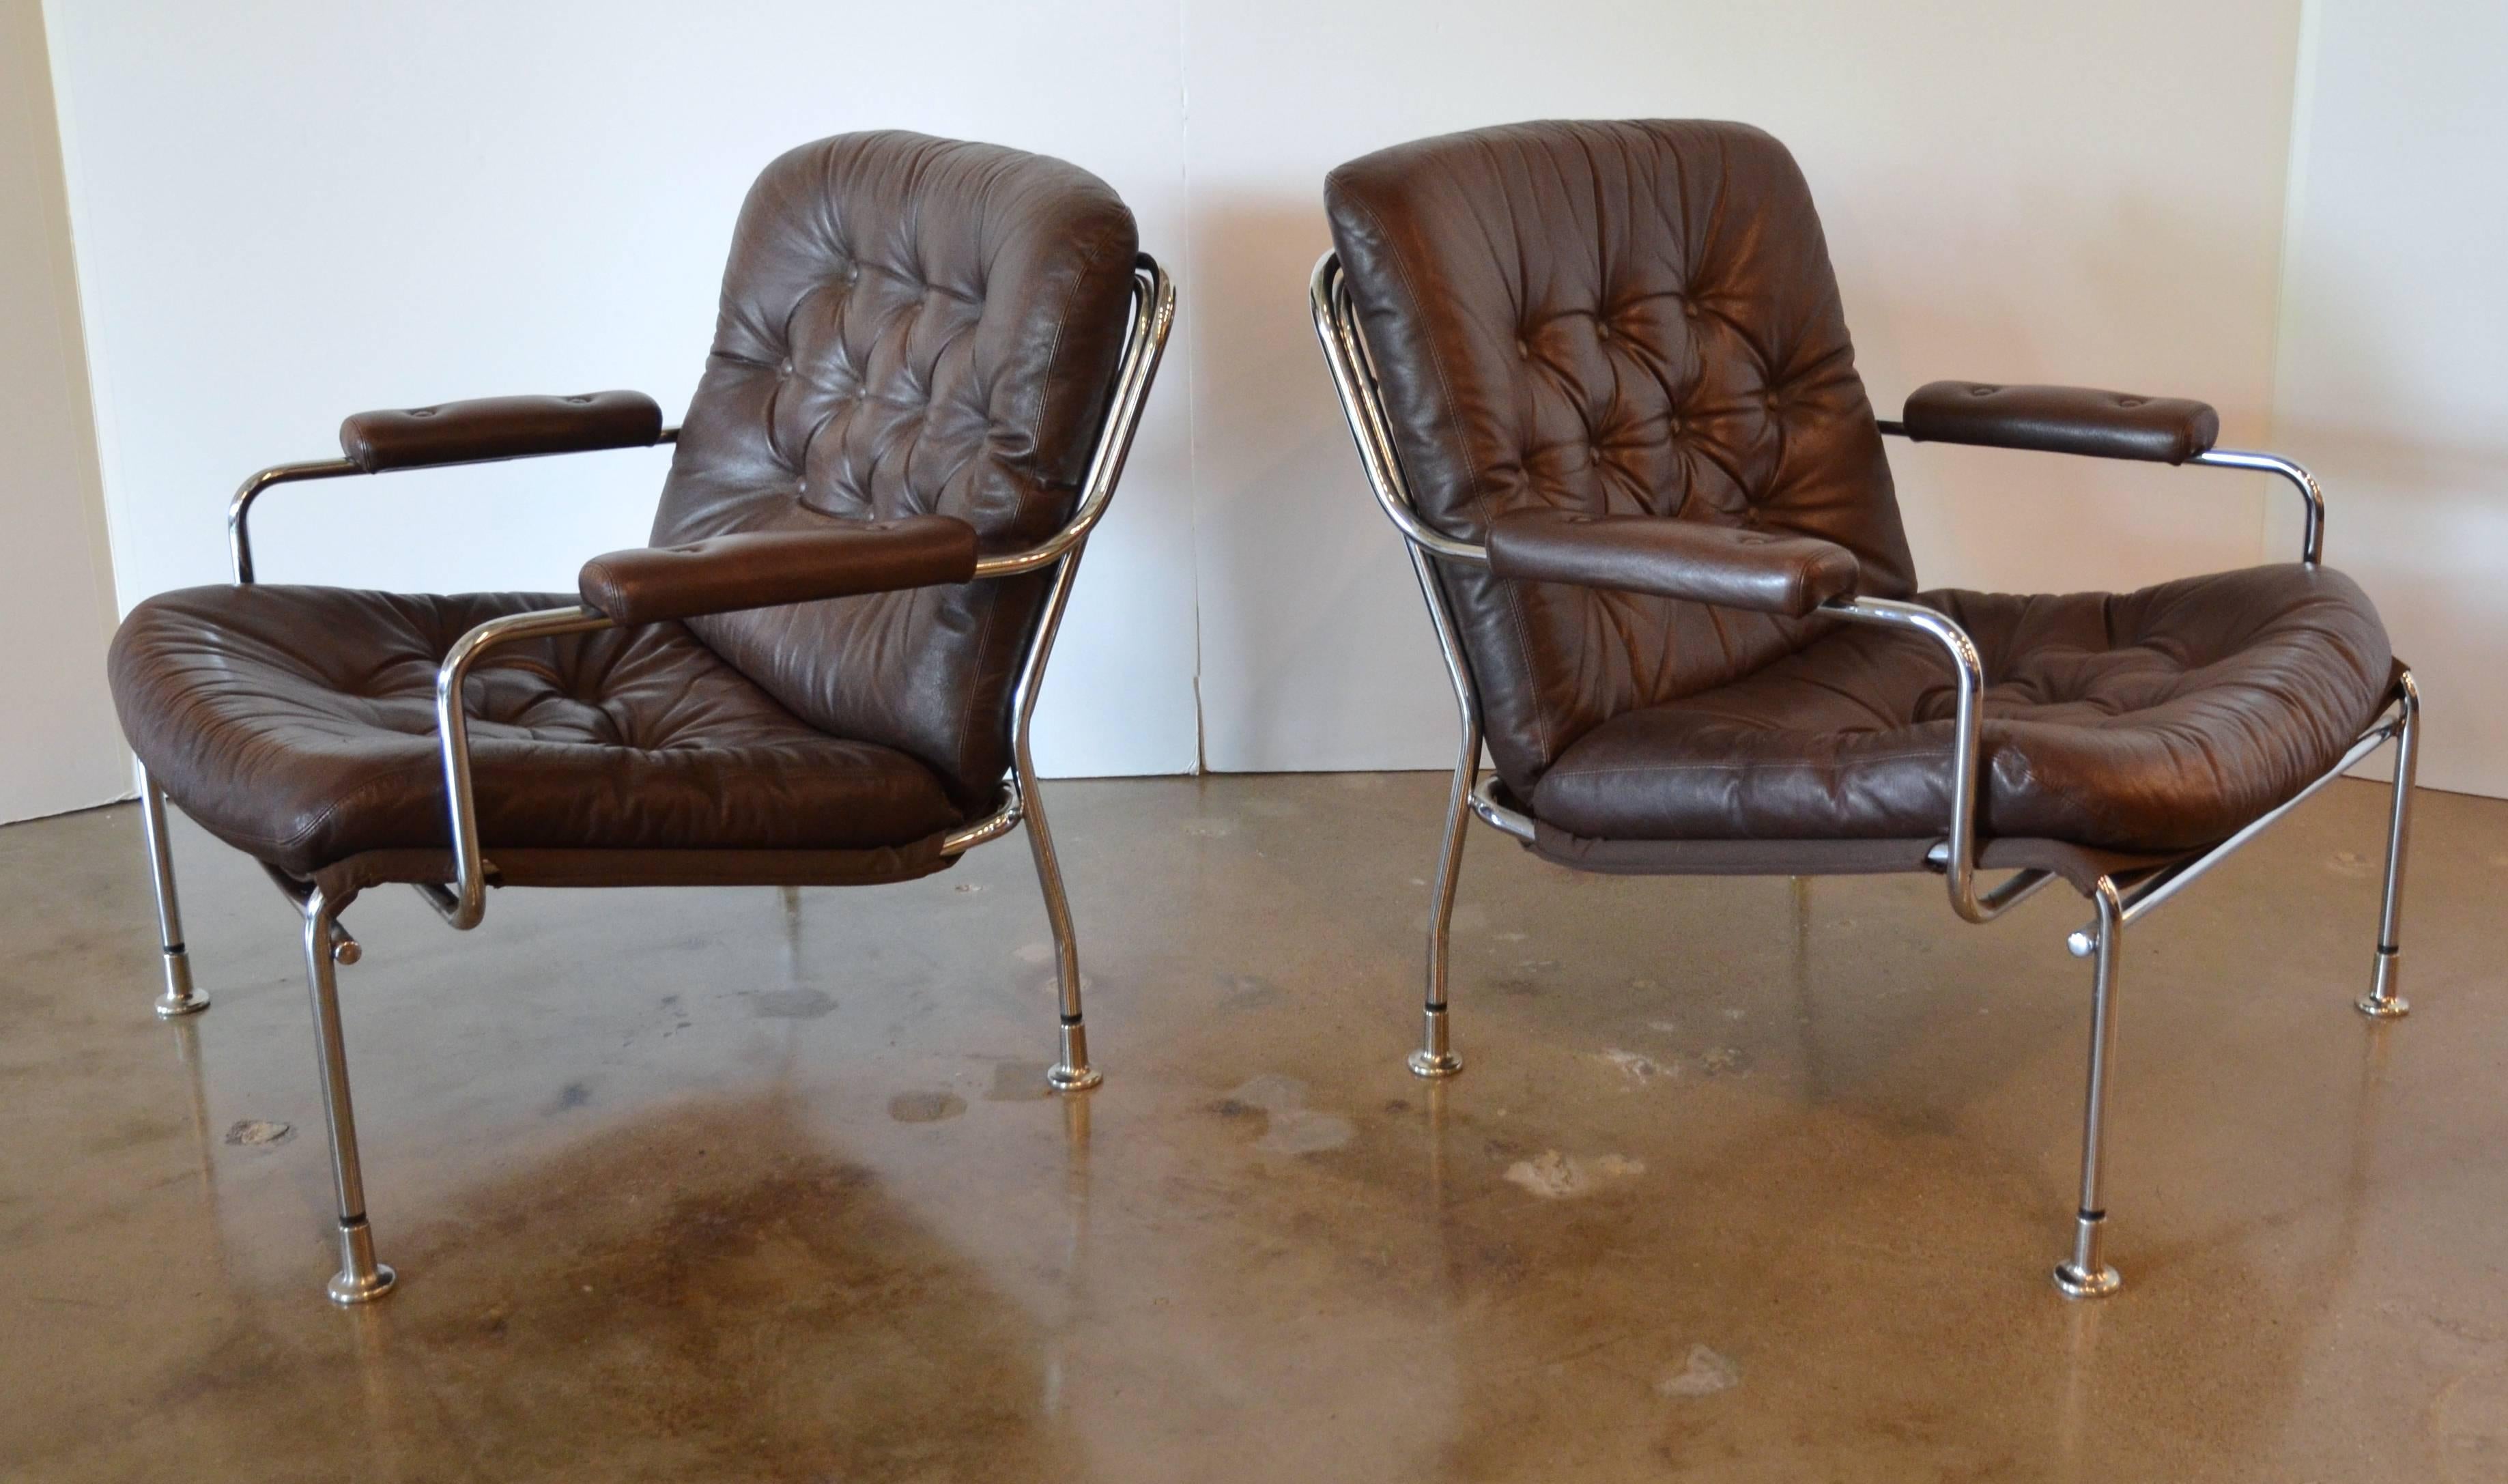 Scandinavian Modern Swedish Chrome and Leather Armchair Attributed to Bruno Mathsson for DUX